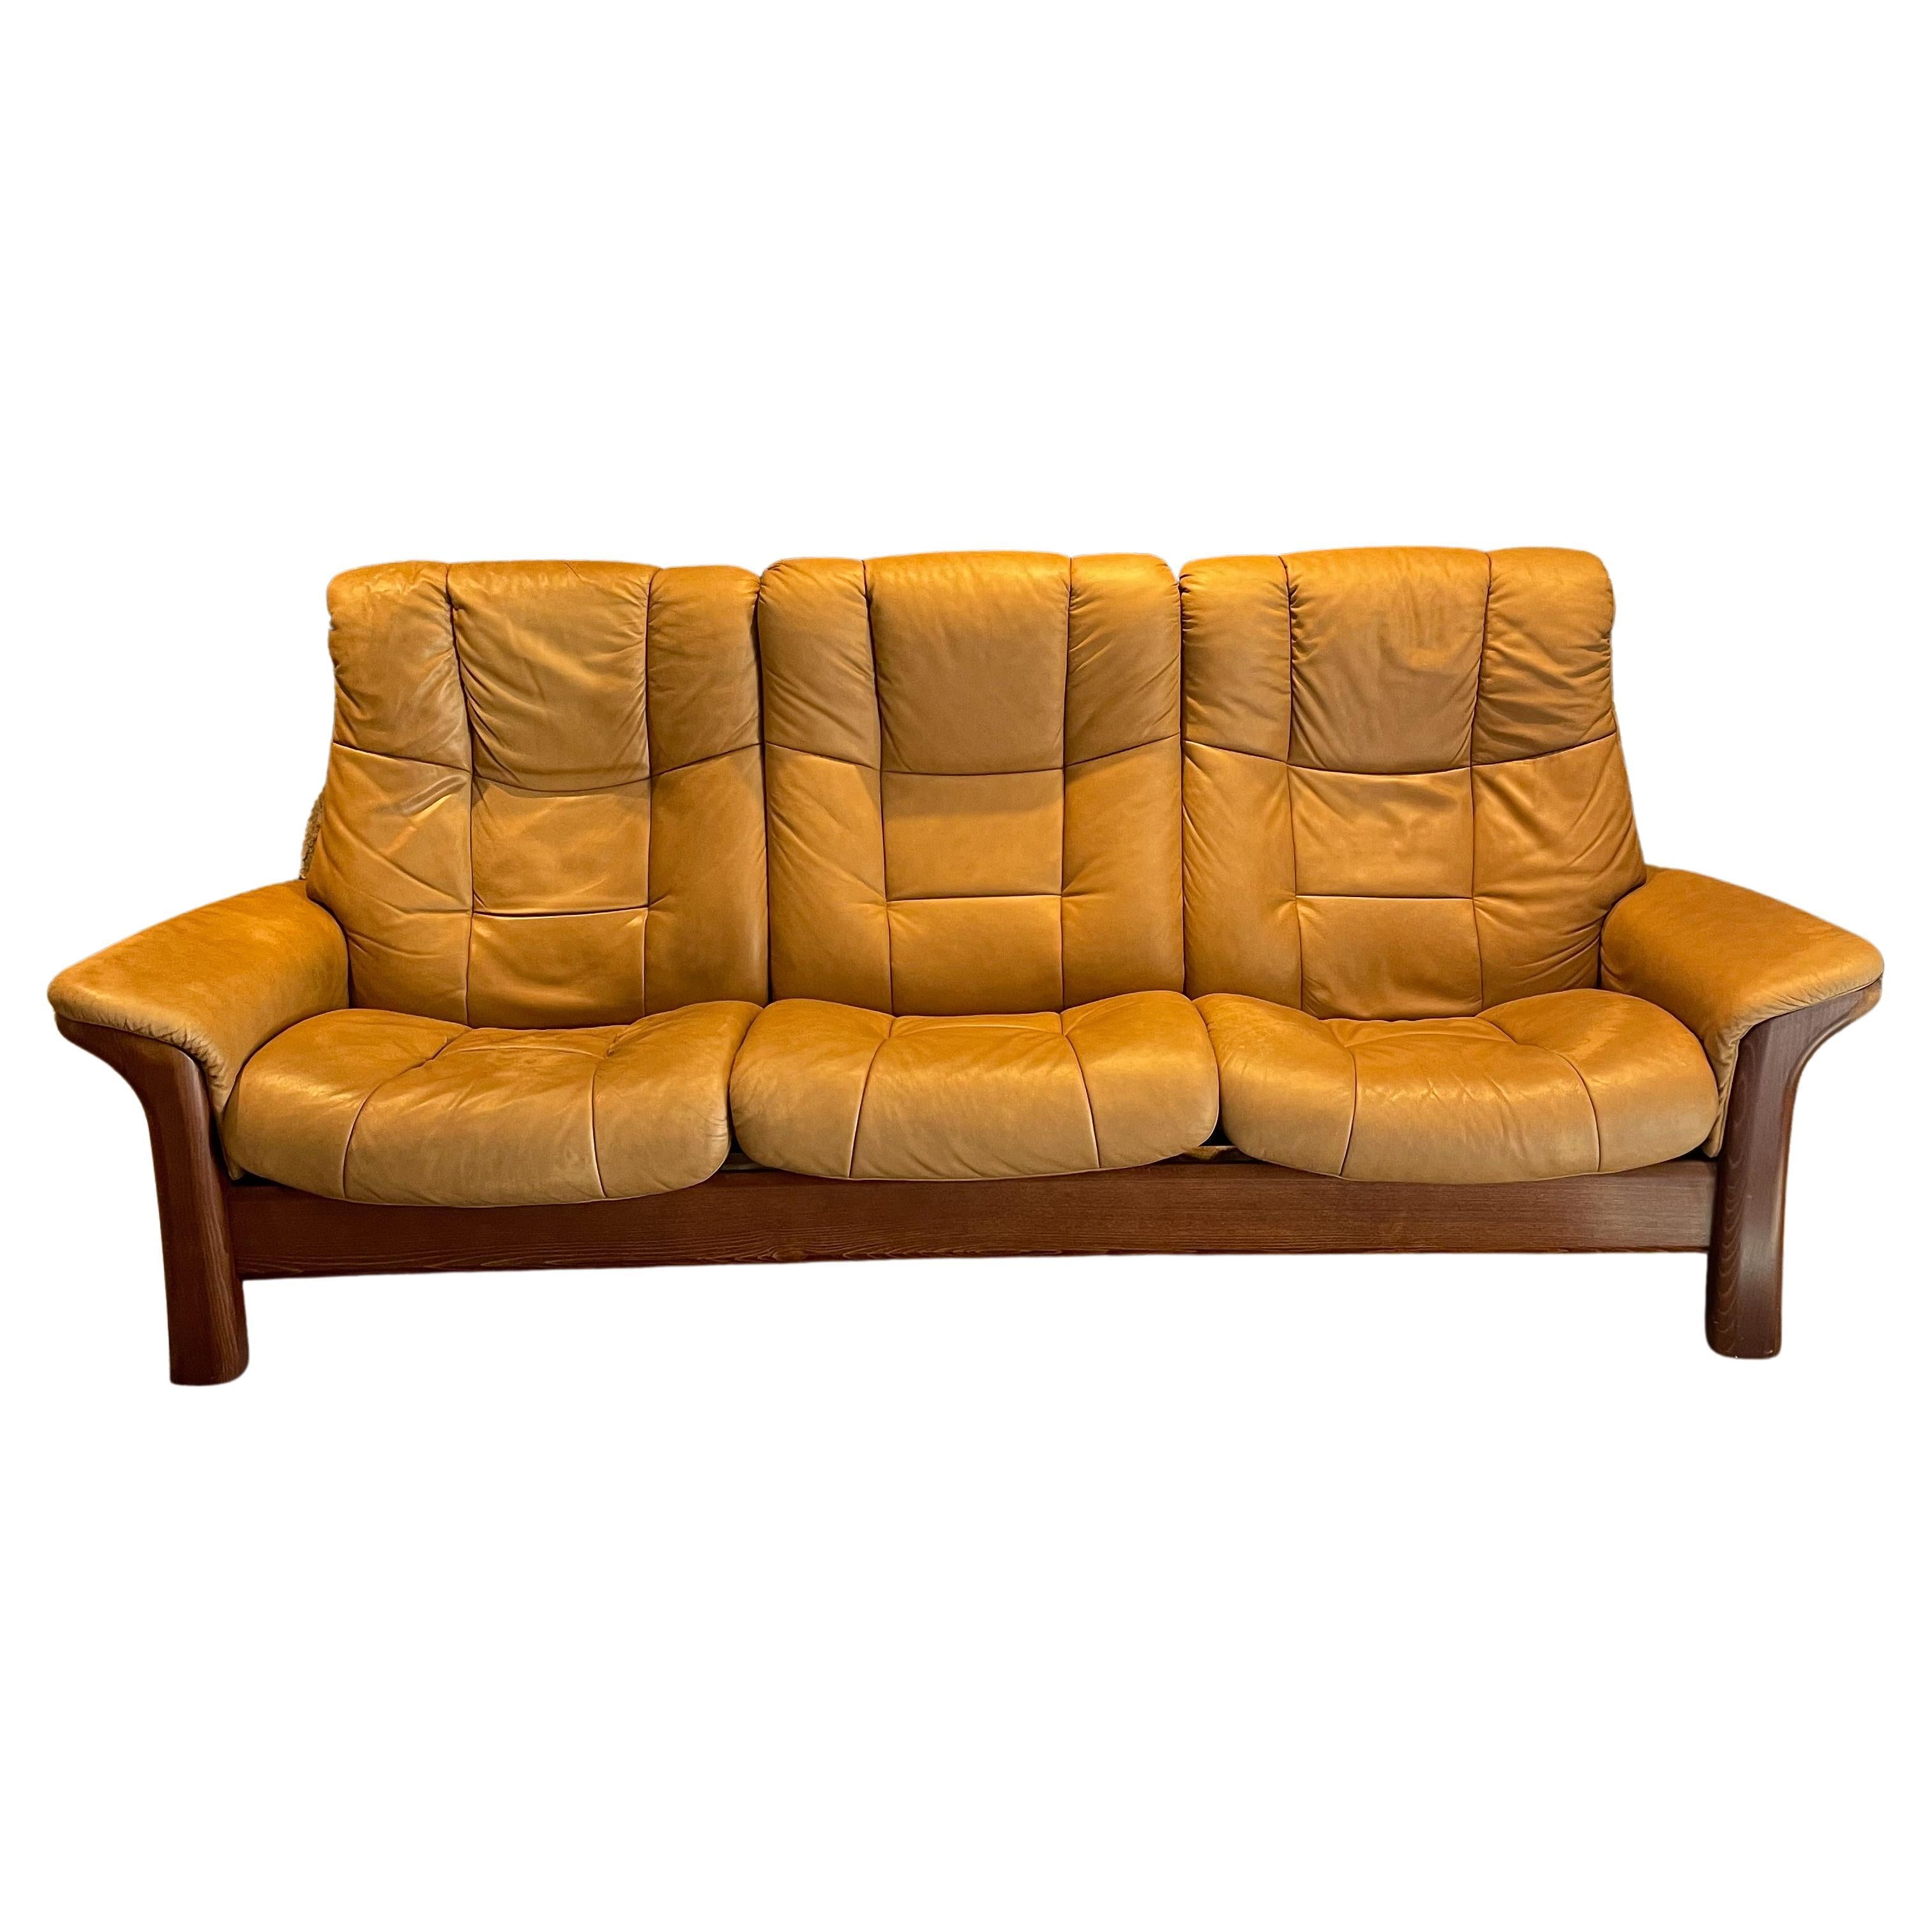 Ekornes Sleek Stressless Reclining Sofa Tan Leather 3-Seater Windsor  High-Back For Sale at 1stDibs | ekornes leather sofa, high back leather sofa,  stephen couch windsor